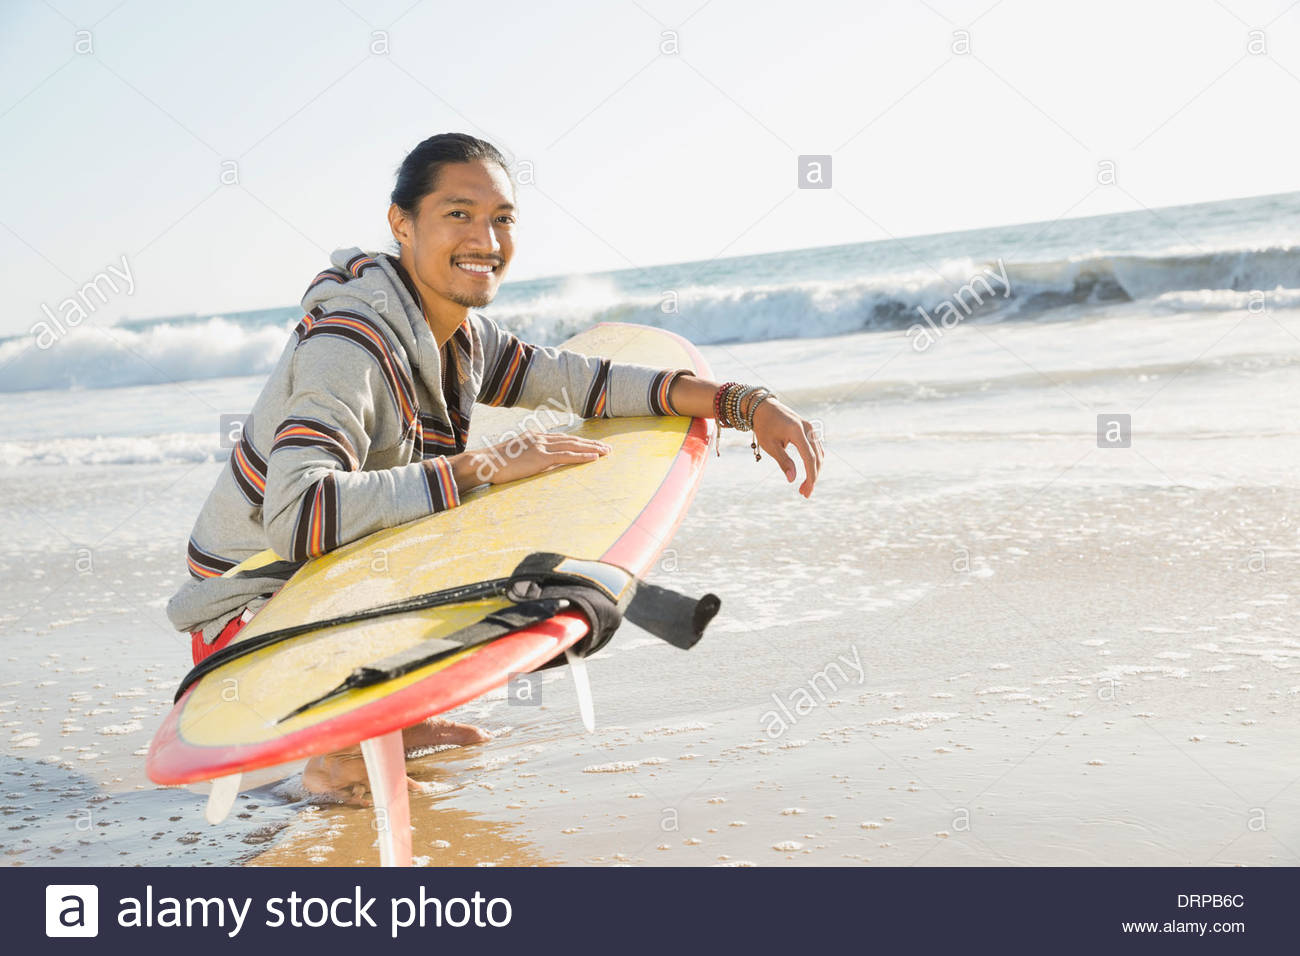 Portrait of man with surfboard crouching on beach Stock Photo